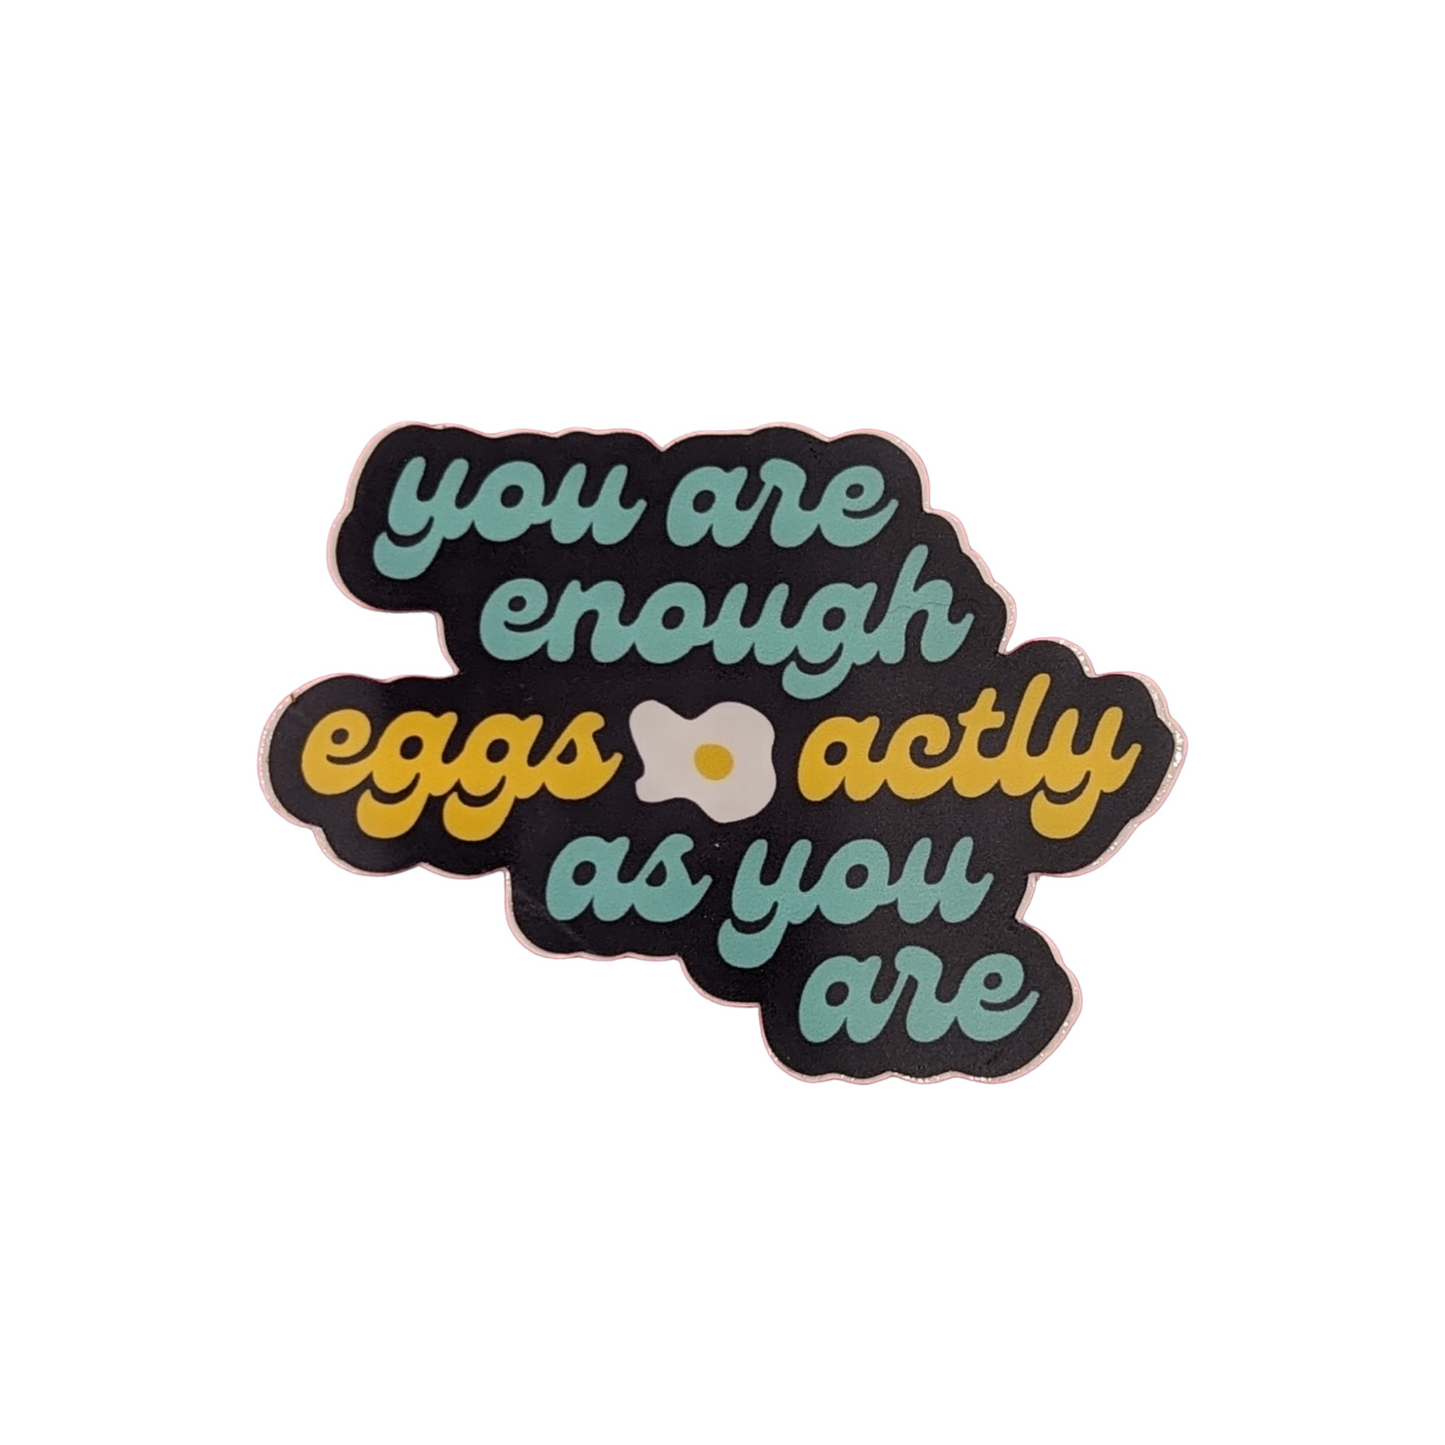 Stickers by manic pixie dream squirrel